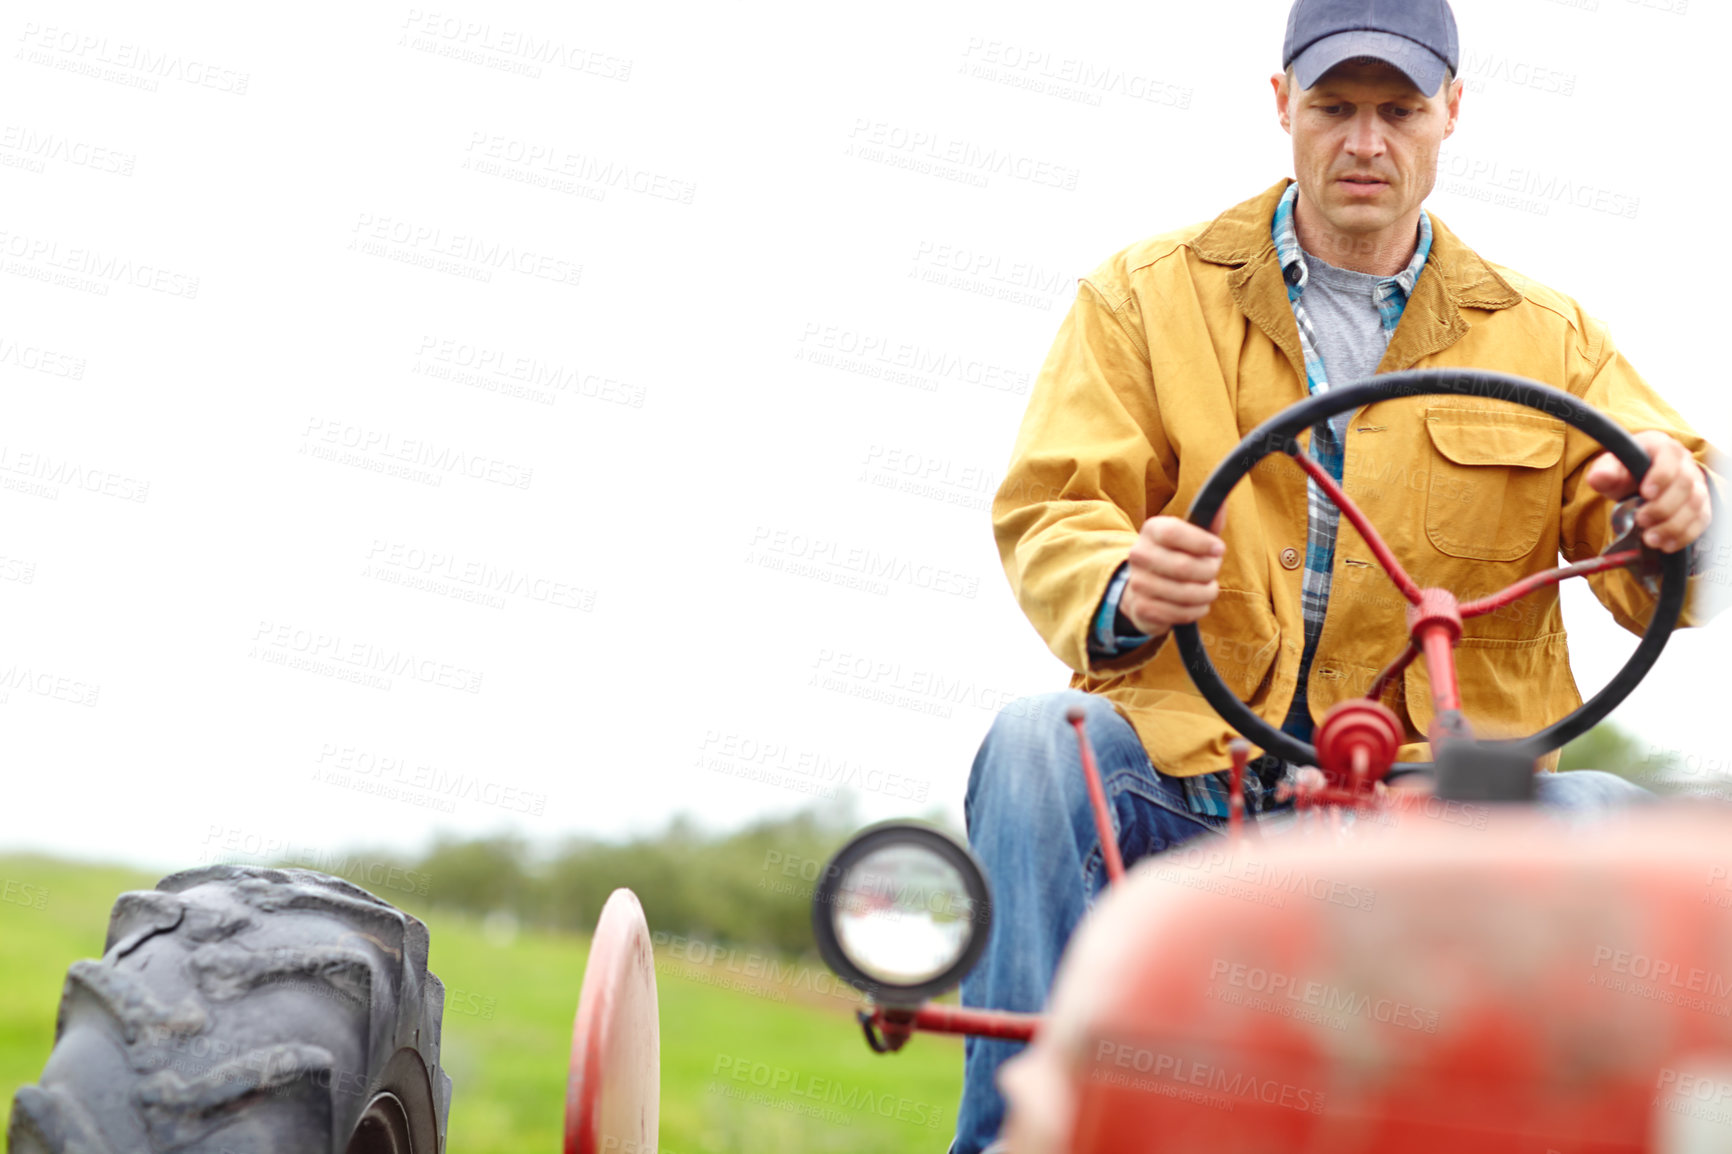 Buy stock photo A farmer driving his tractor on an open field